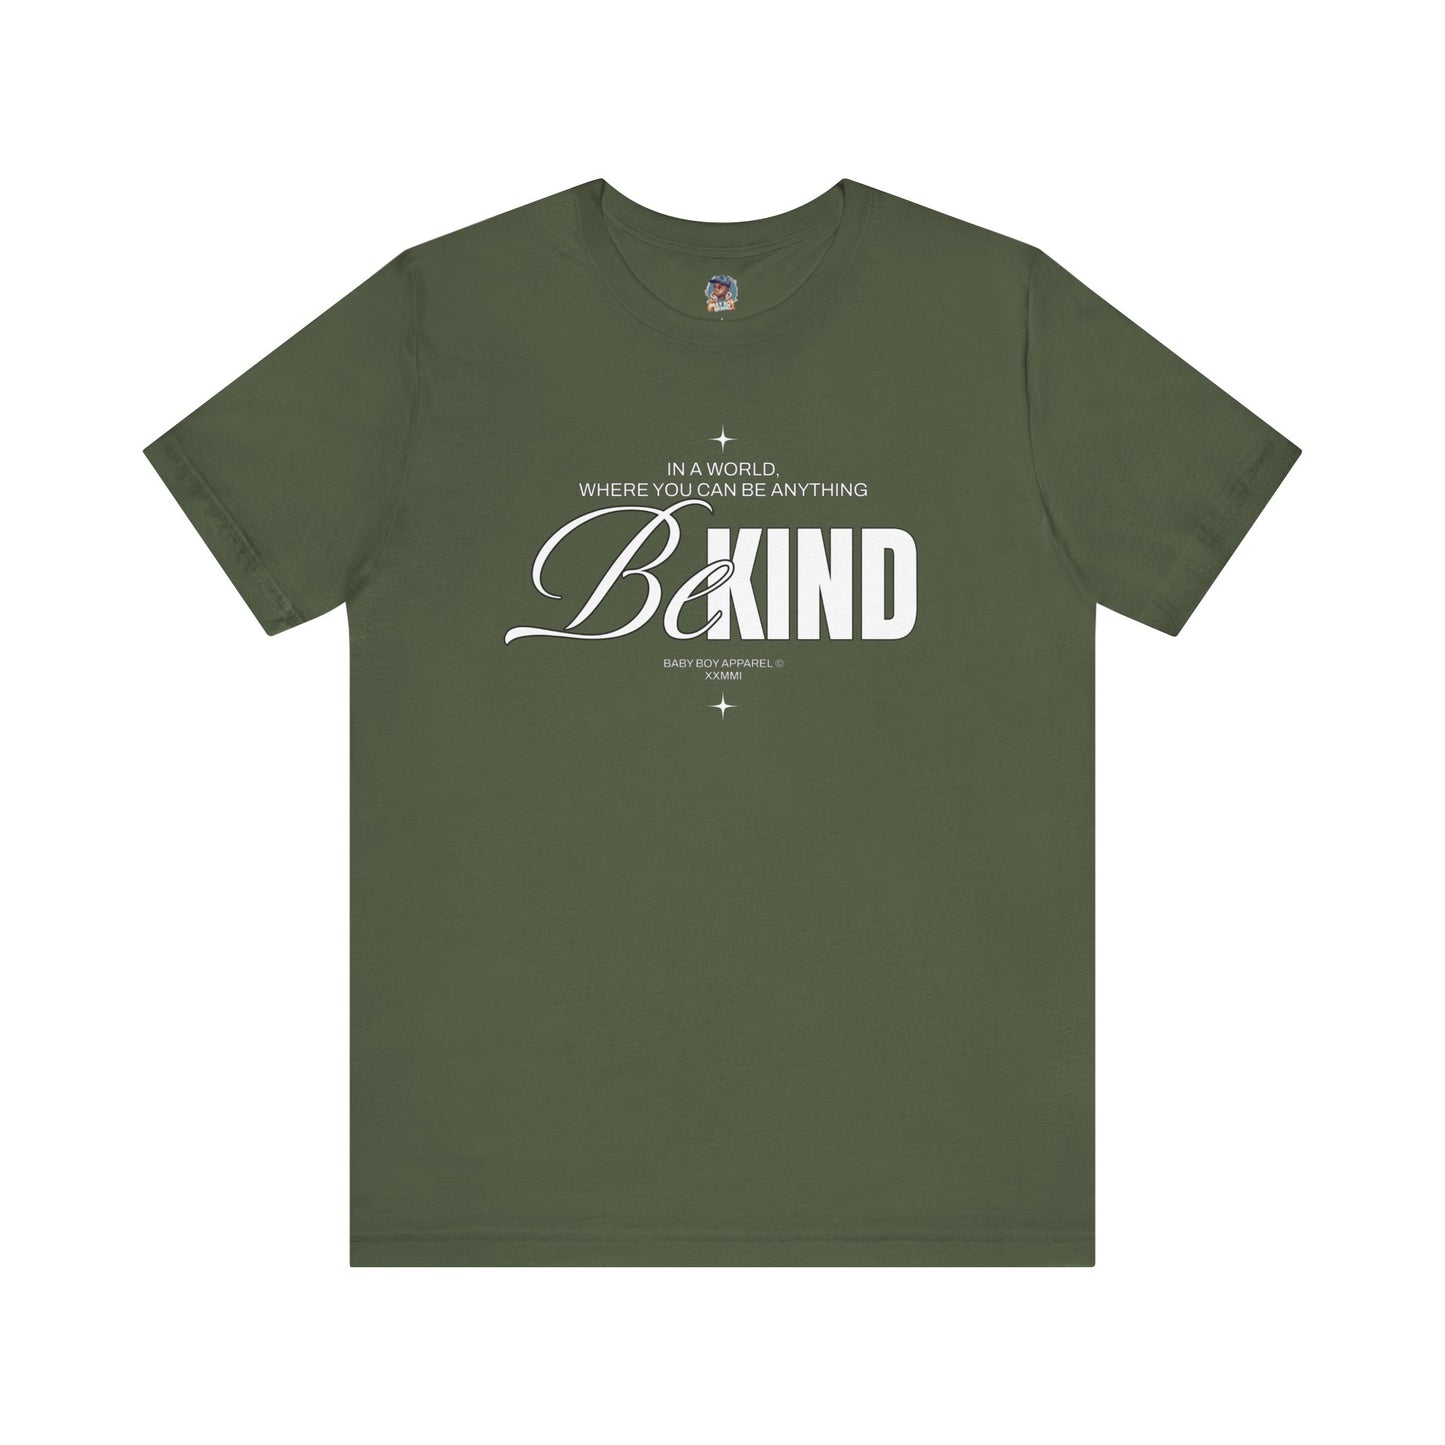 "Be Kind T-shirt"